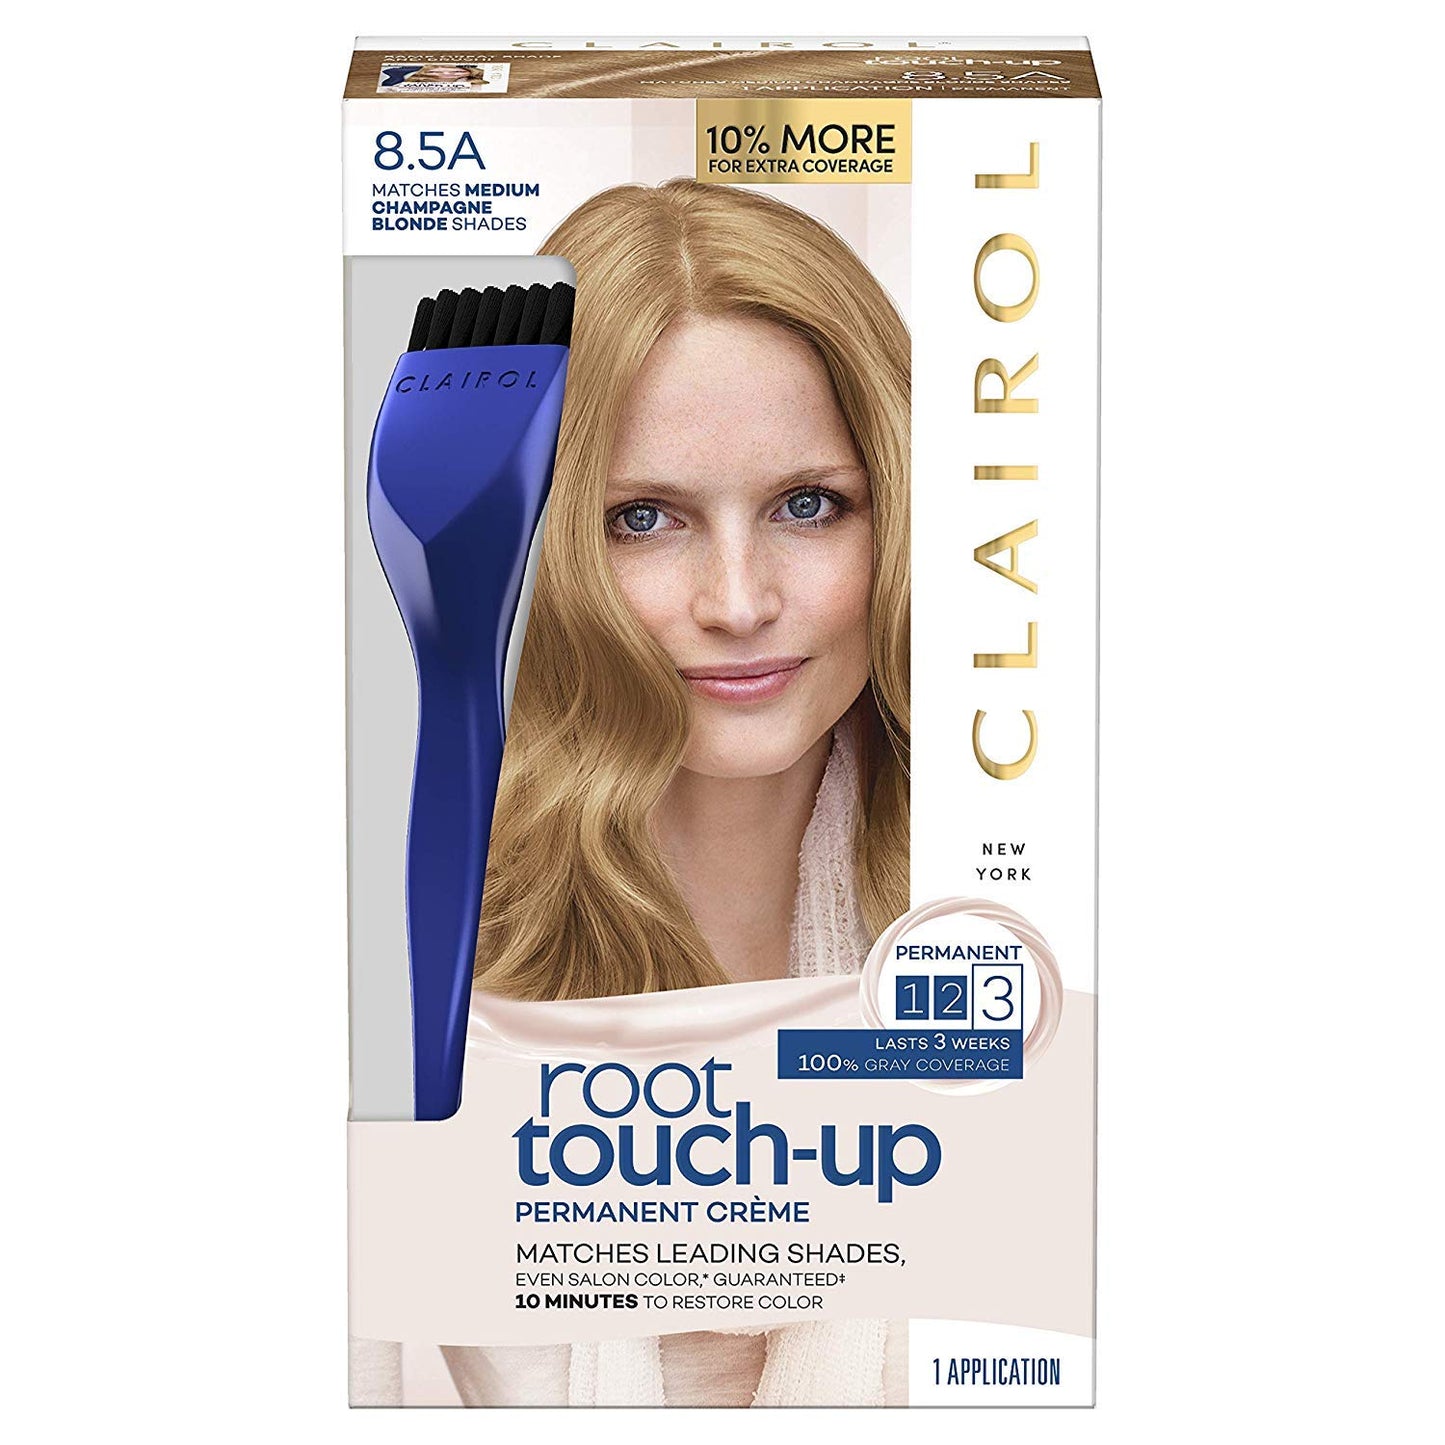 Clairol Root Touch-Up by Nice'n Easy Permanent Hair Dye, 8.5A Medium Champagne Blonde Hair Color, Pack of 1